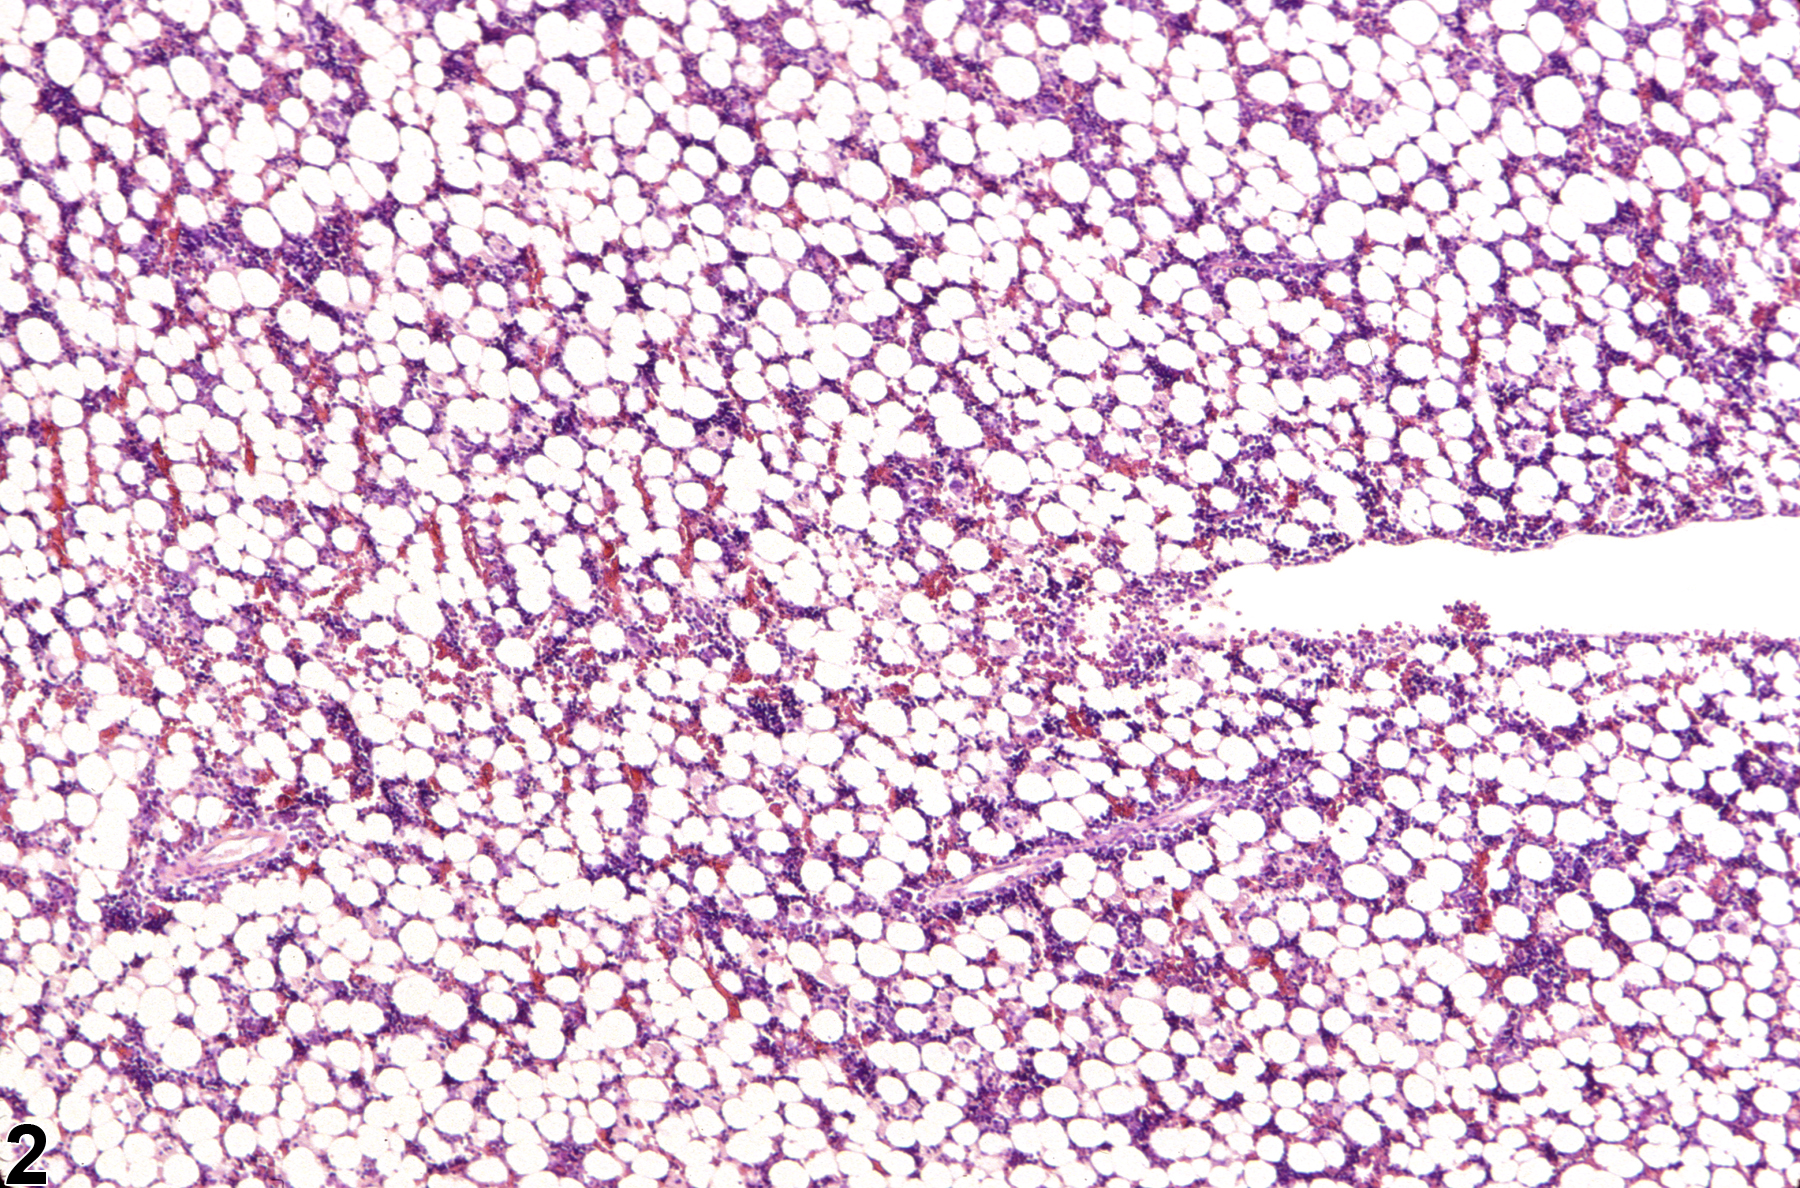 Image of hypocellularity in the bone marrow from a female F344/N rat in a subchronic study